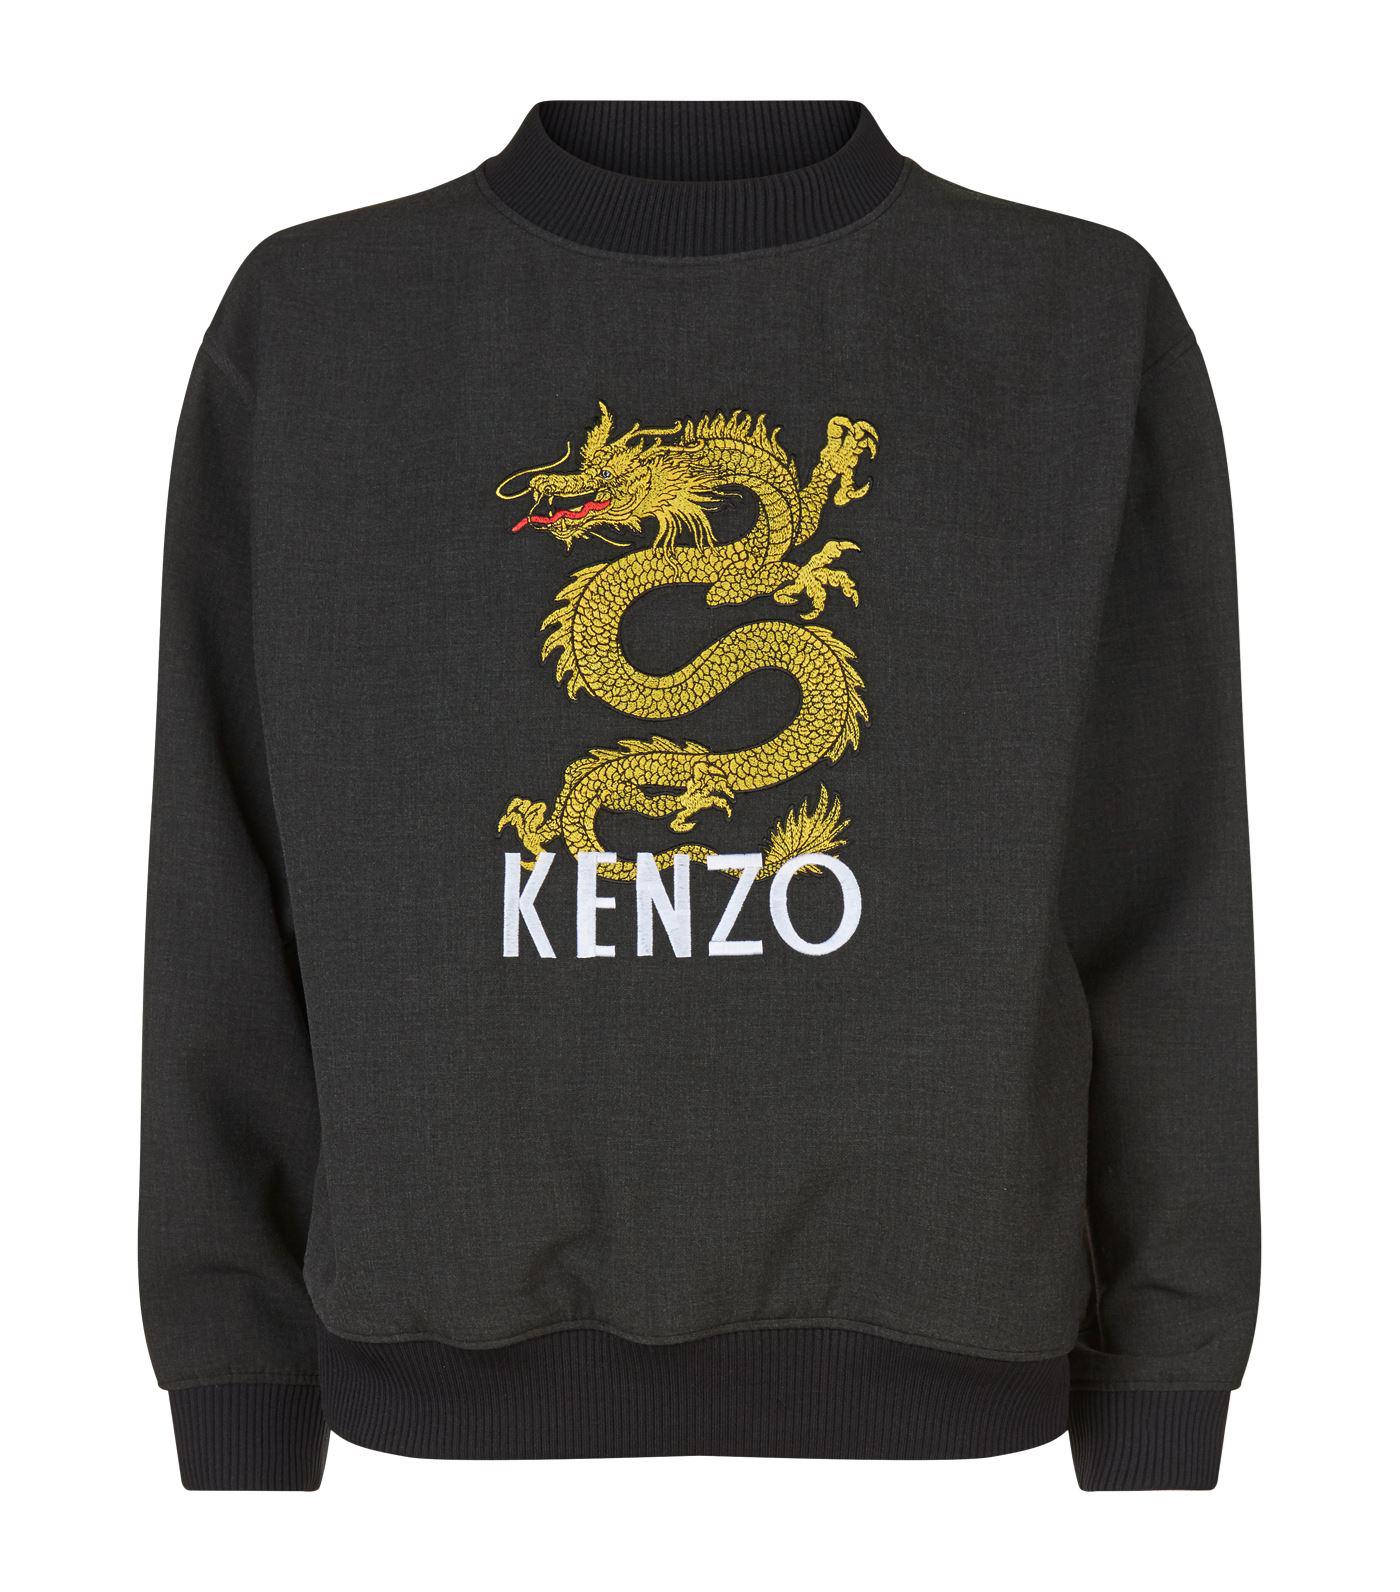 KENZO Embroidered Dragon Sweater in Grey (Gray) for Men - Lyst